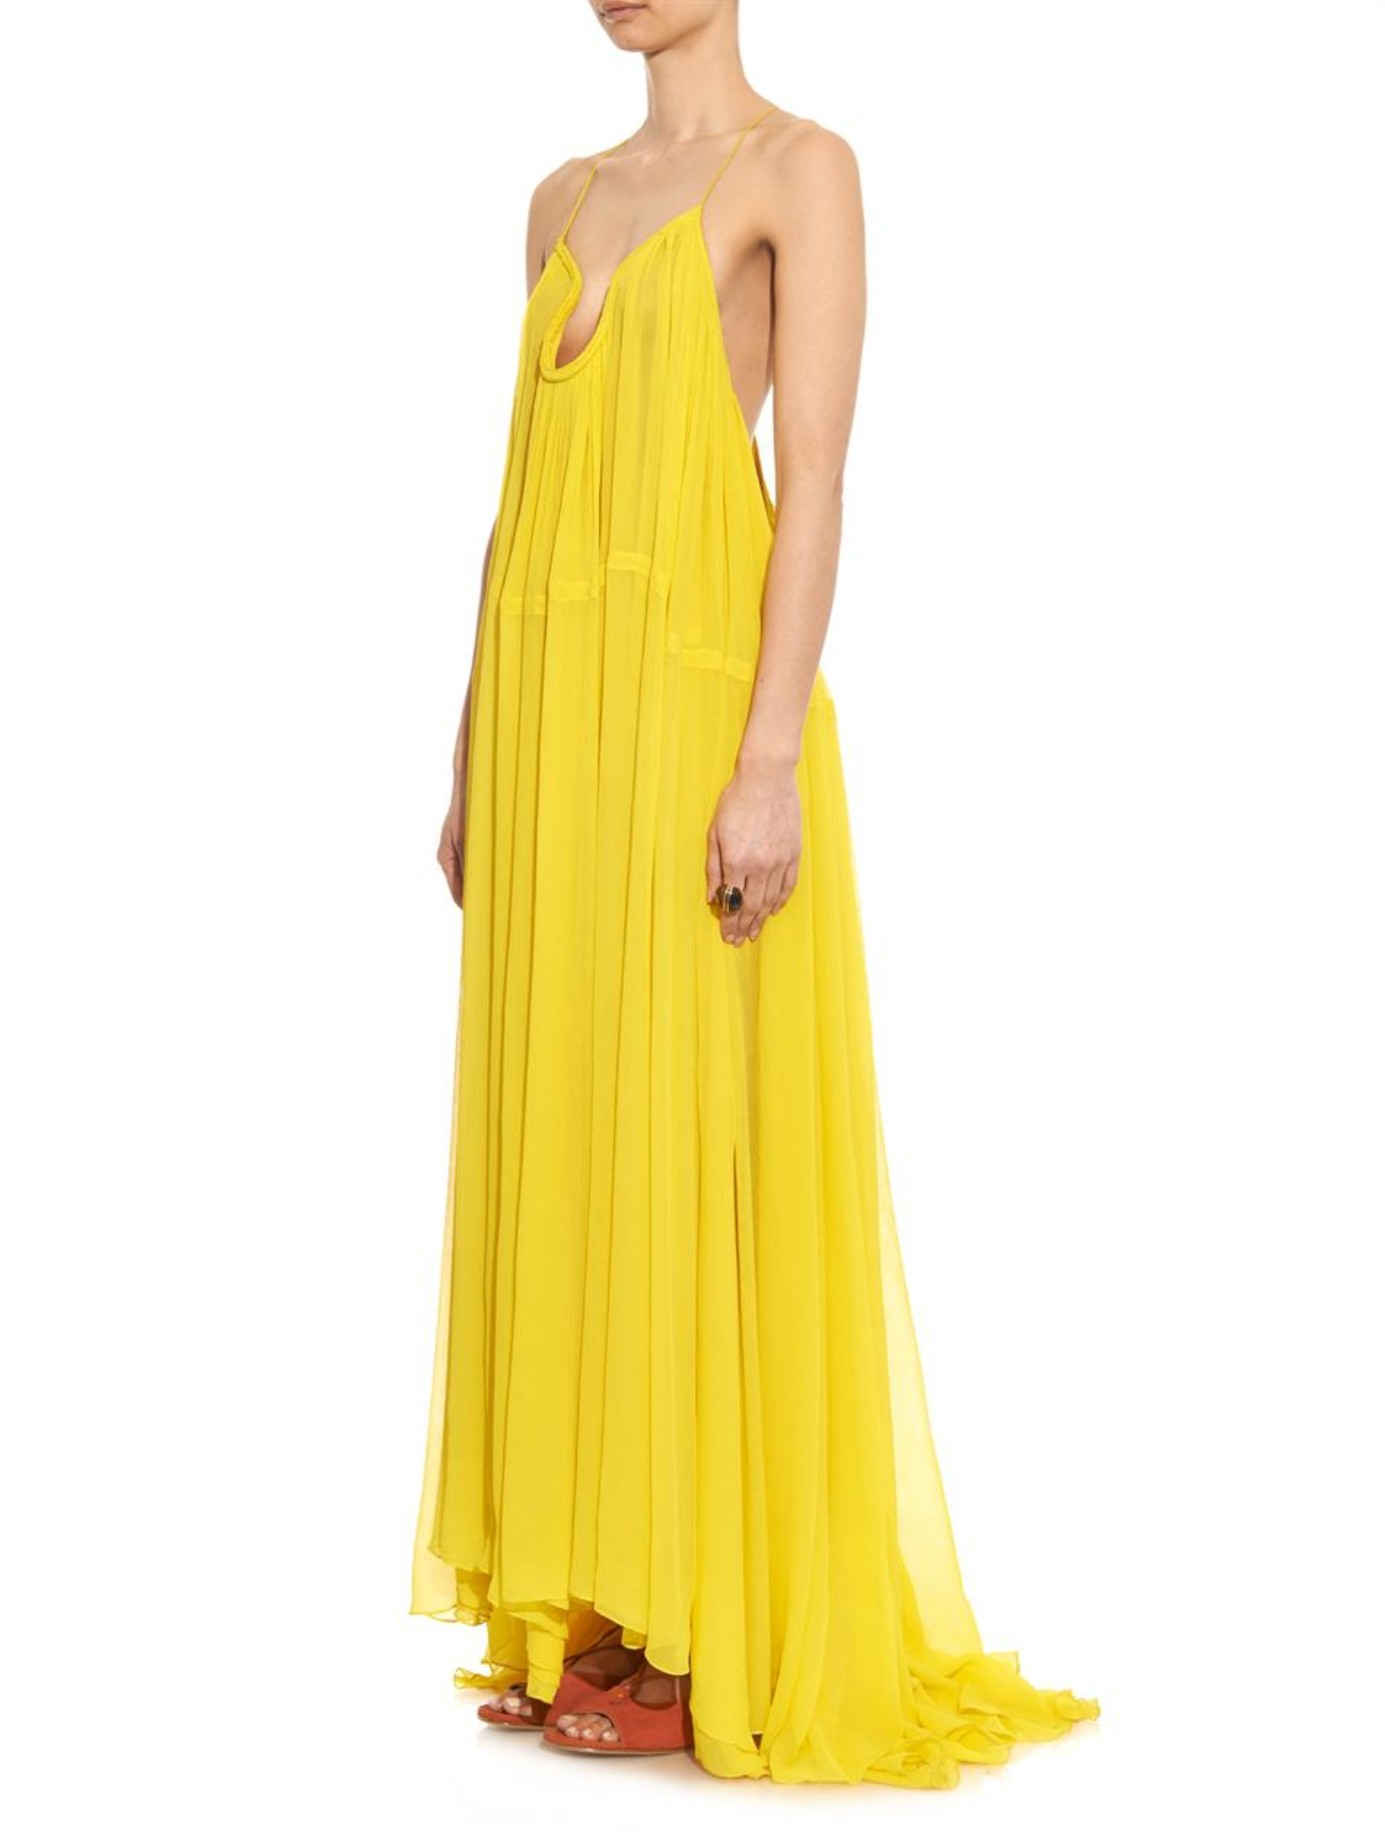 Chloé Silk-Voile Maxi Dress in Yellow - Lyst